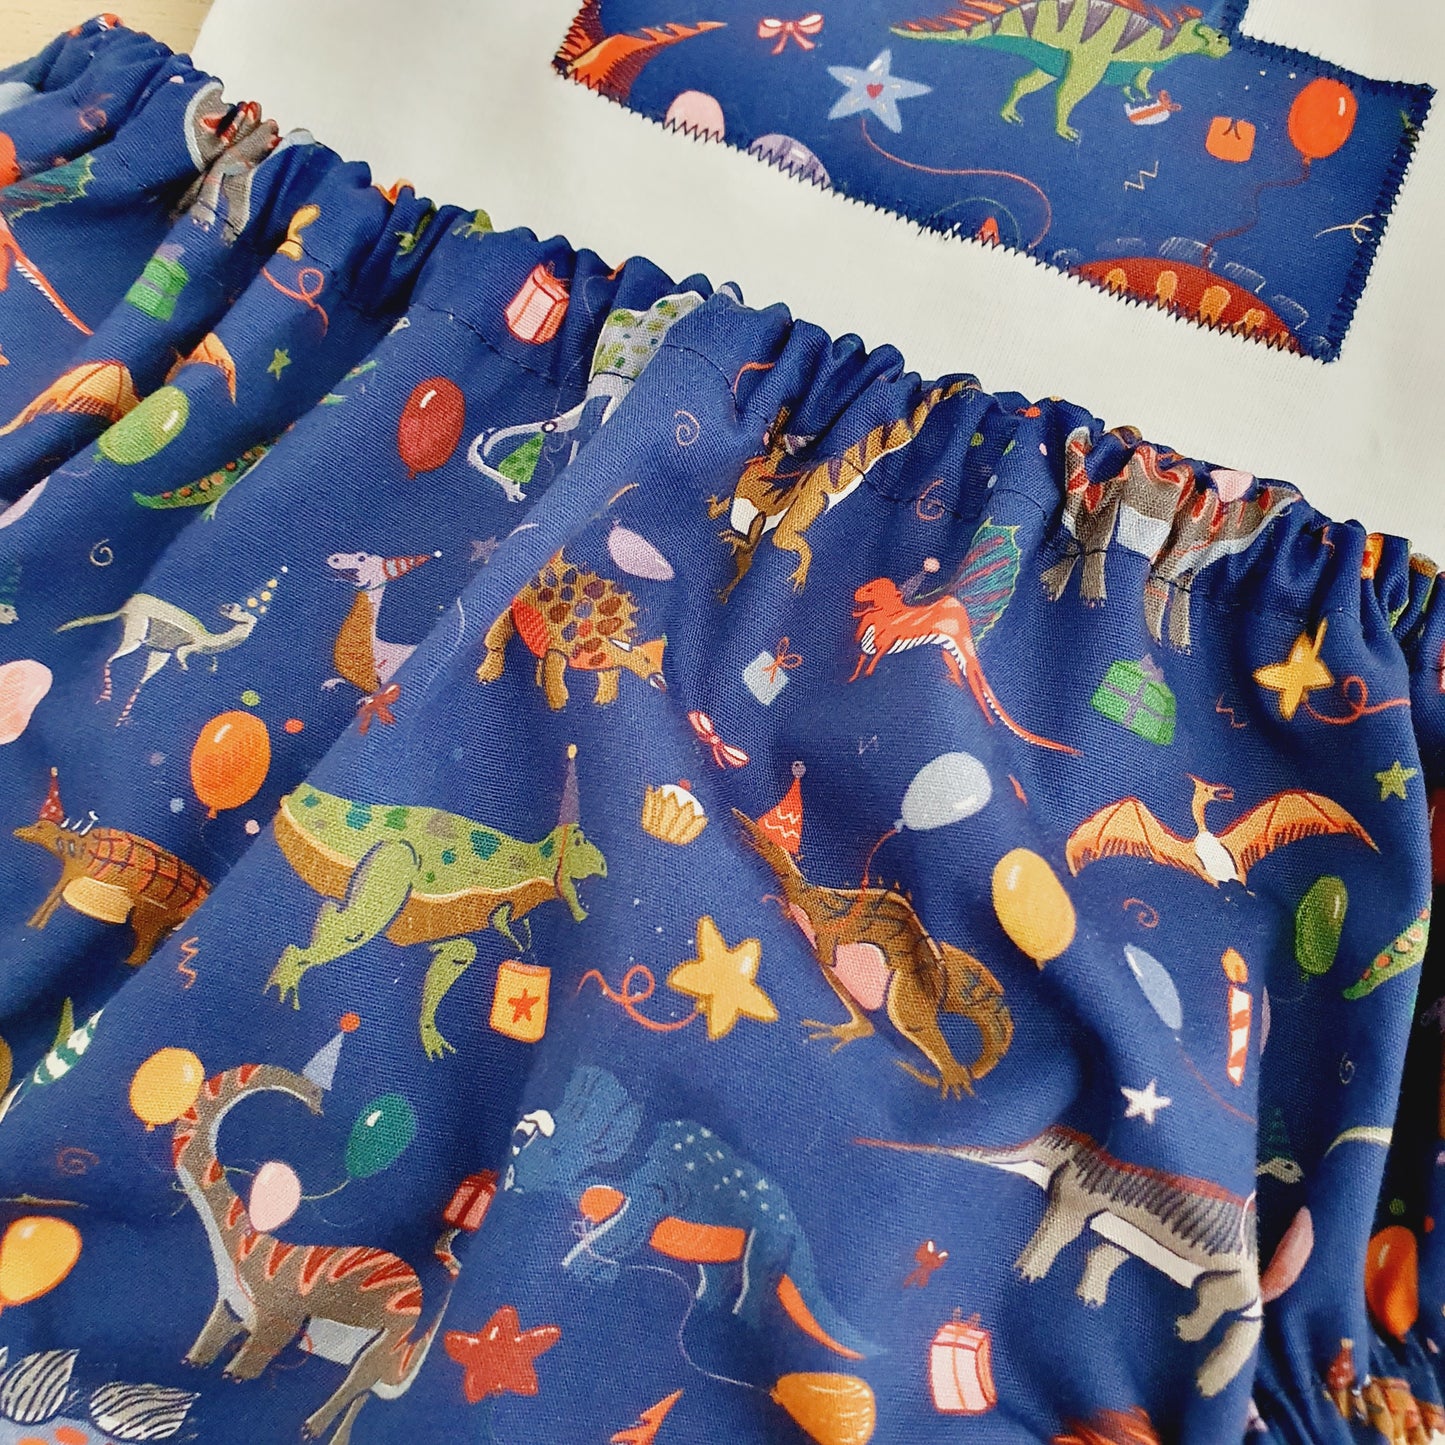 DINOSAURS PARTY Boys 1st Birthday - Cake Smash Outfit - Size 0, Nappy Cover, Tie & Singlet Set